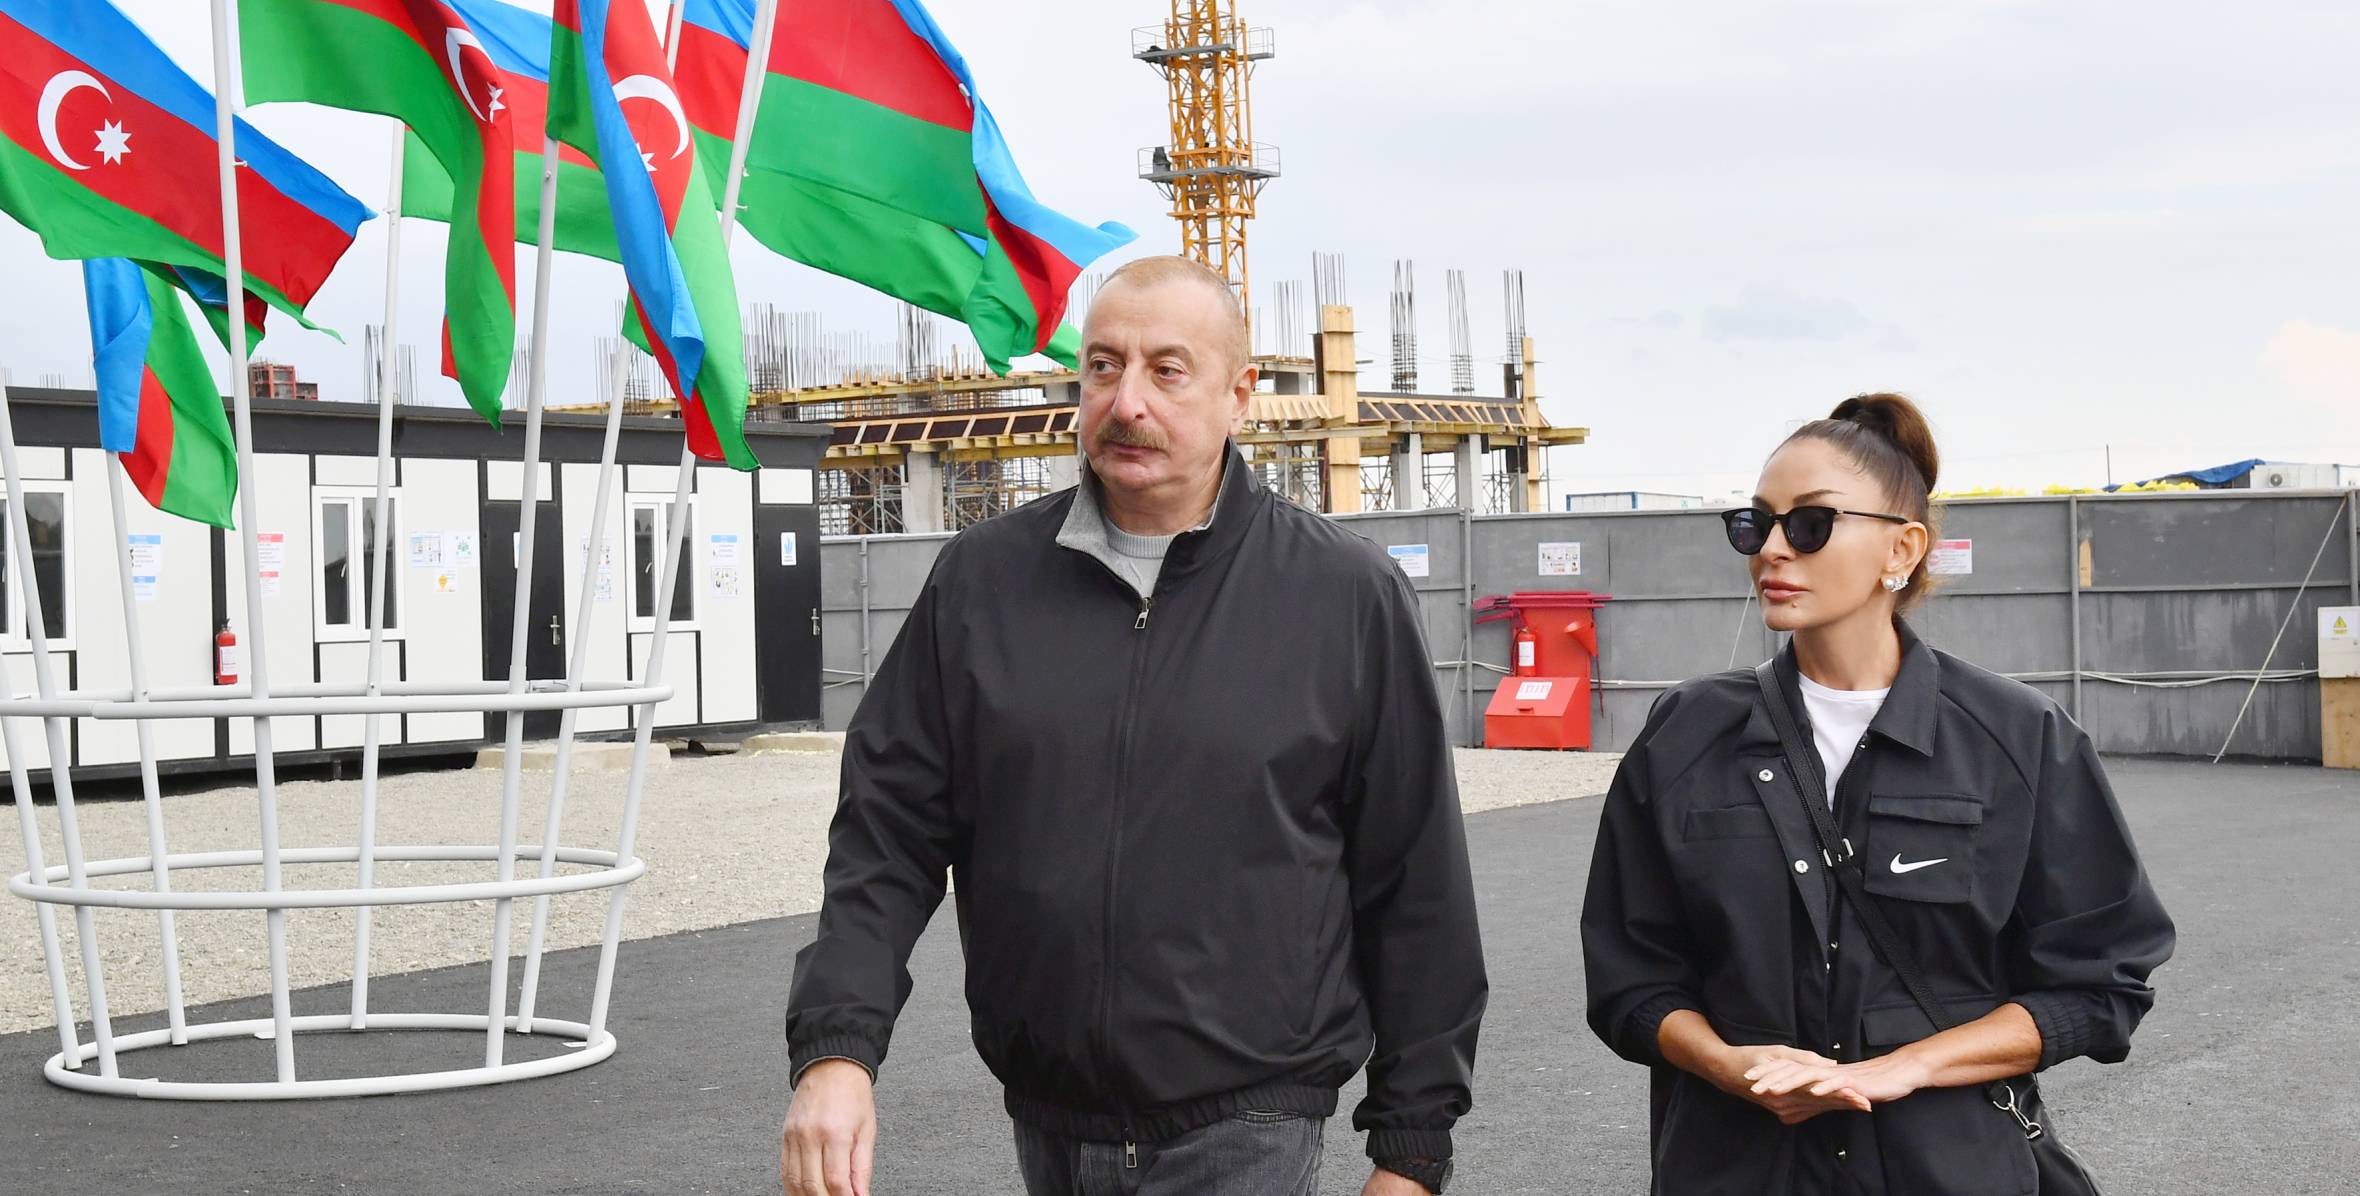 Ilham Aliyev and First Lady Mehriban Aliyeva attended groundbreaking ceremony for Aghdam Mugham Center